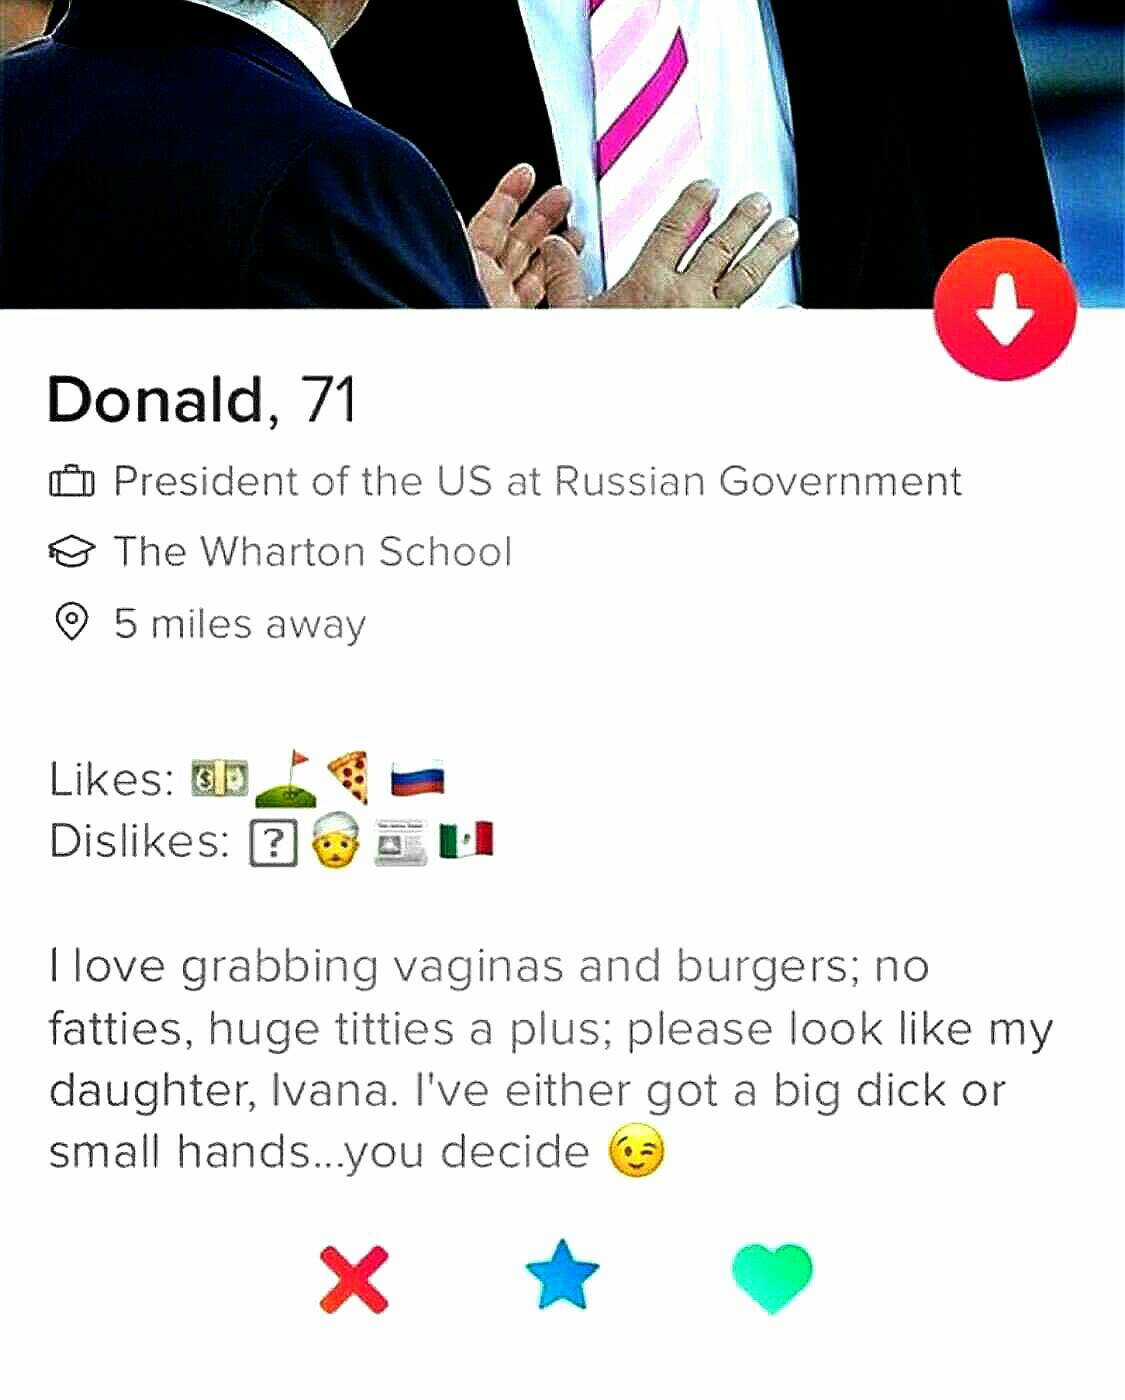 human behavior - Donald, 71 President of the Us at Russian Government @ The Wharton School 5 miles away 35 Dis 2 U Tlove grabbing vaginas and burgers; no fatties, huge titties a plus; please look my daughter, Ivana. I've either got a big dick or small han